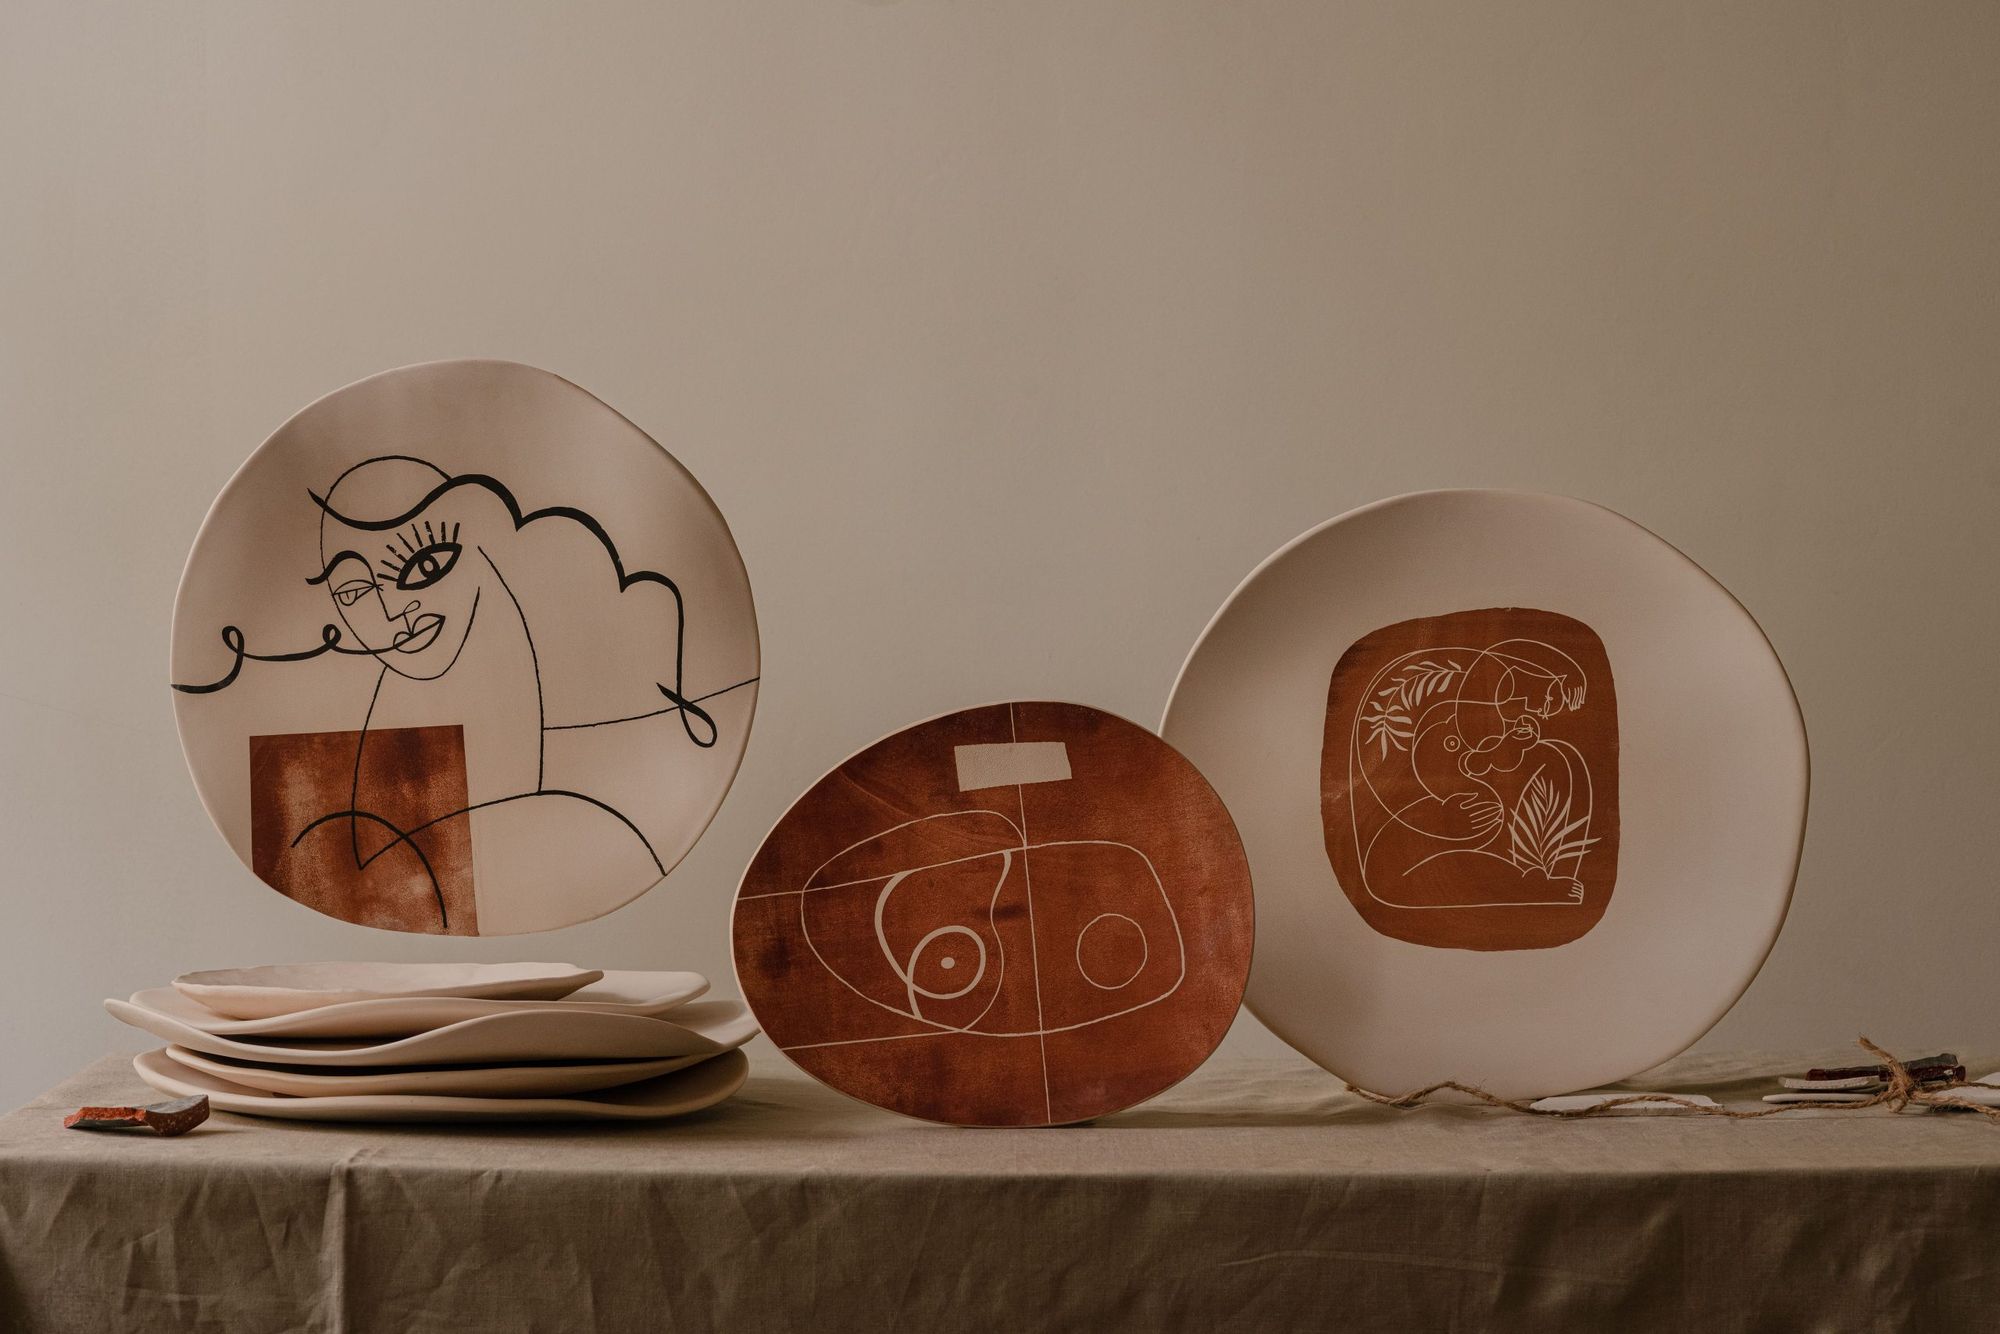 The sanctity of the modern kitchen: wall ceramics from Poland